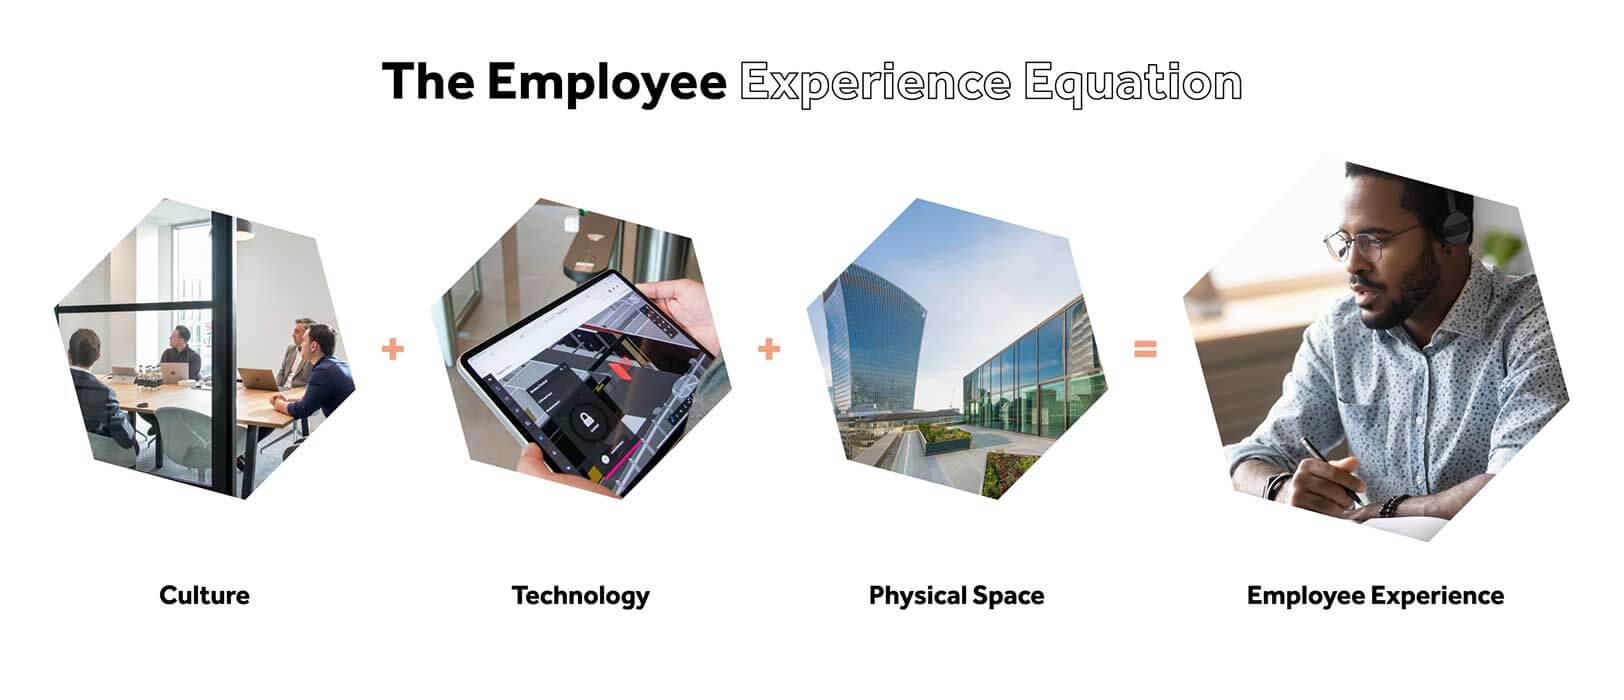 employee experience equation by Jacob Morgan